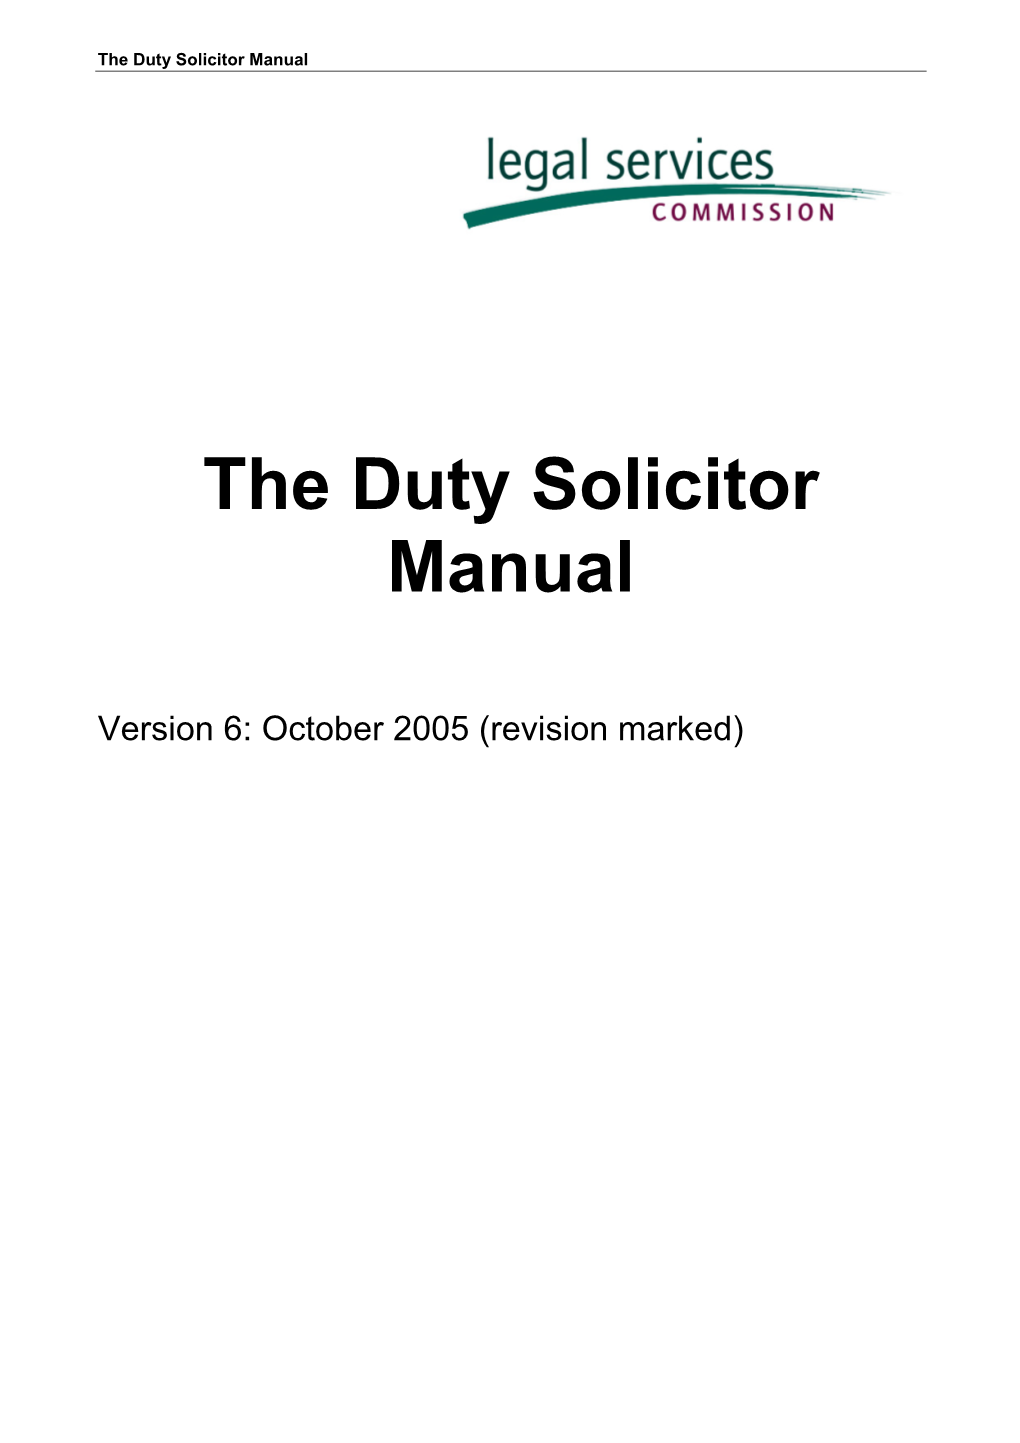 The Duty Solicitor Manual